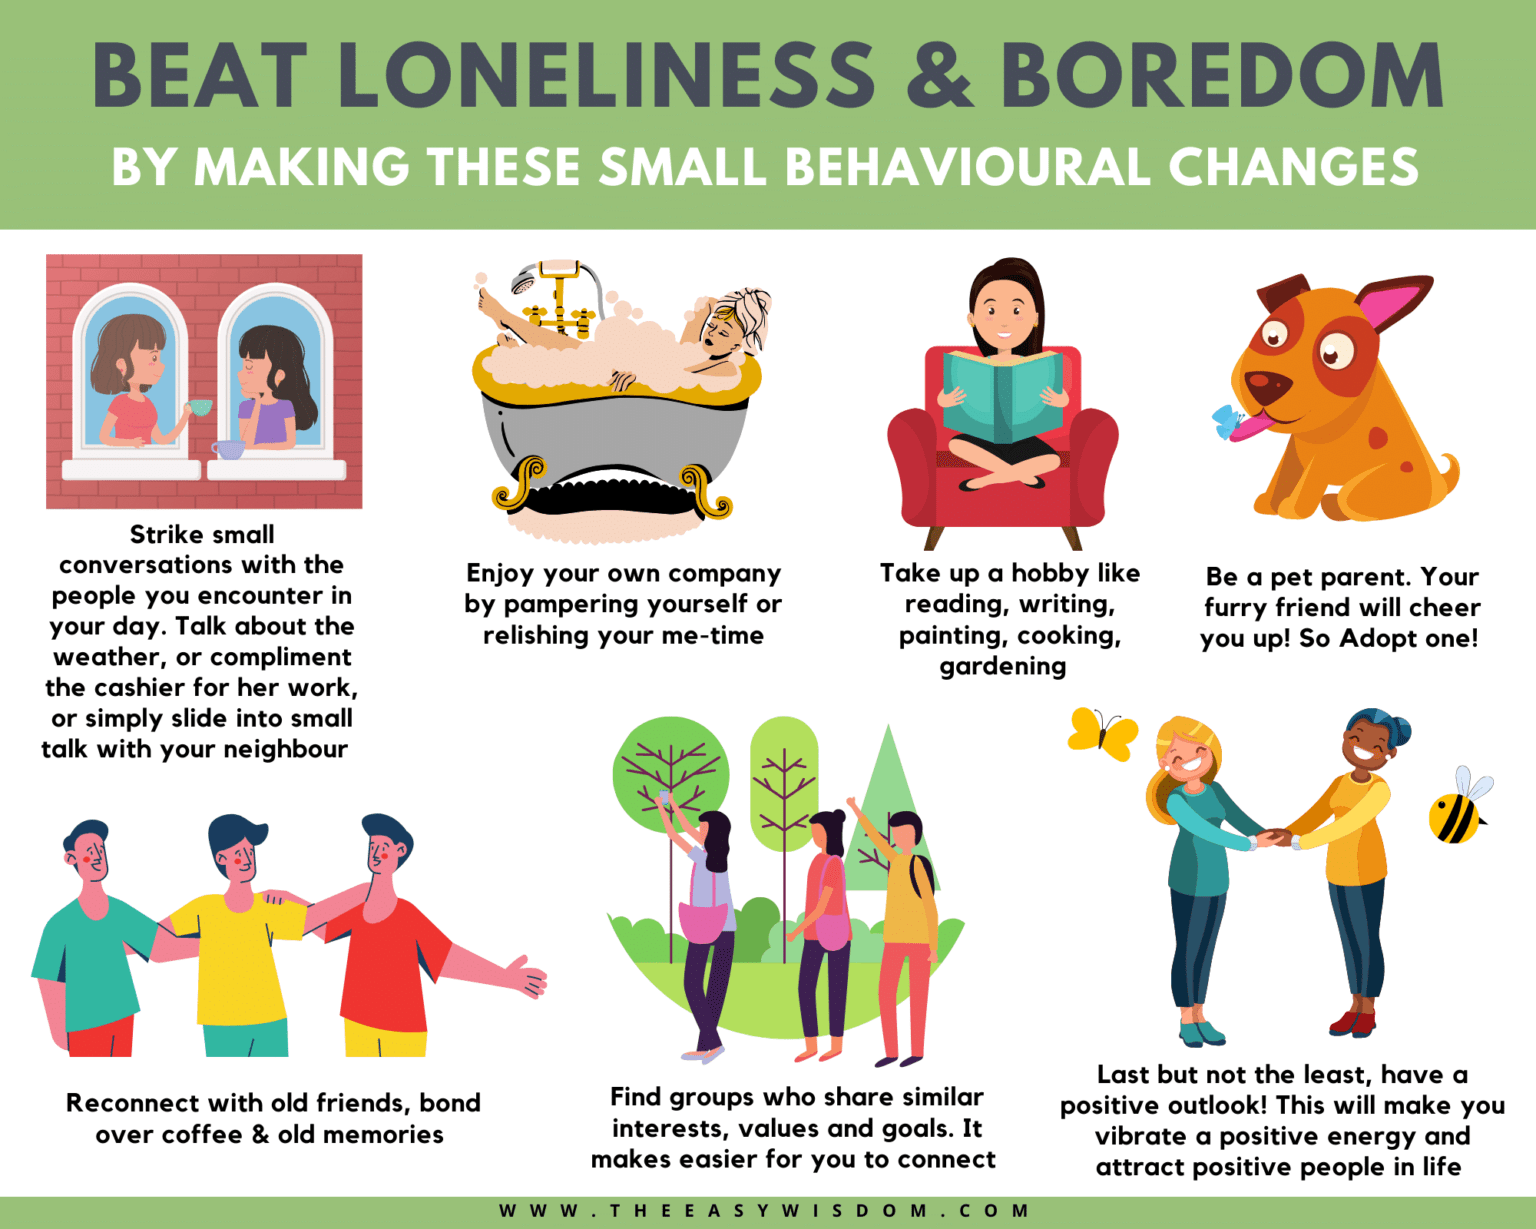 11 Things To Do When Feeling Bored and Lonely?